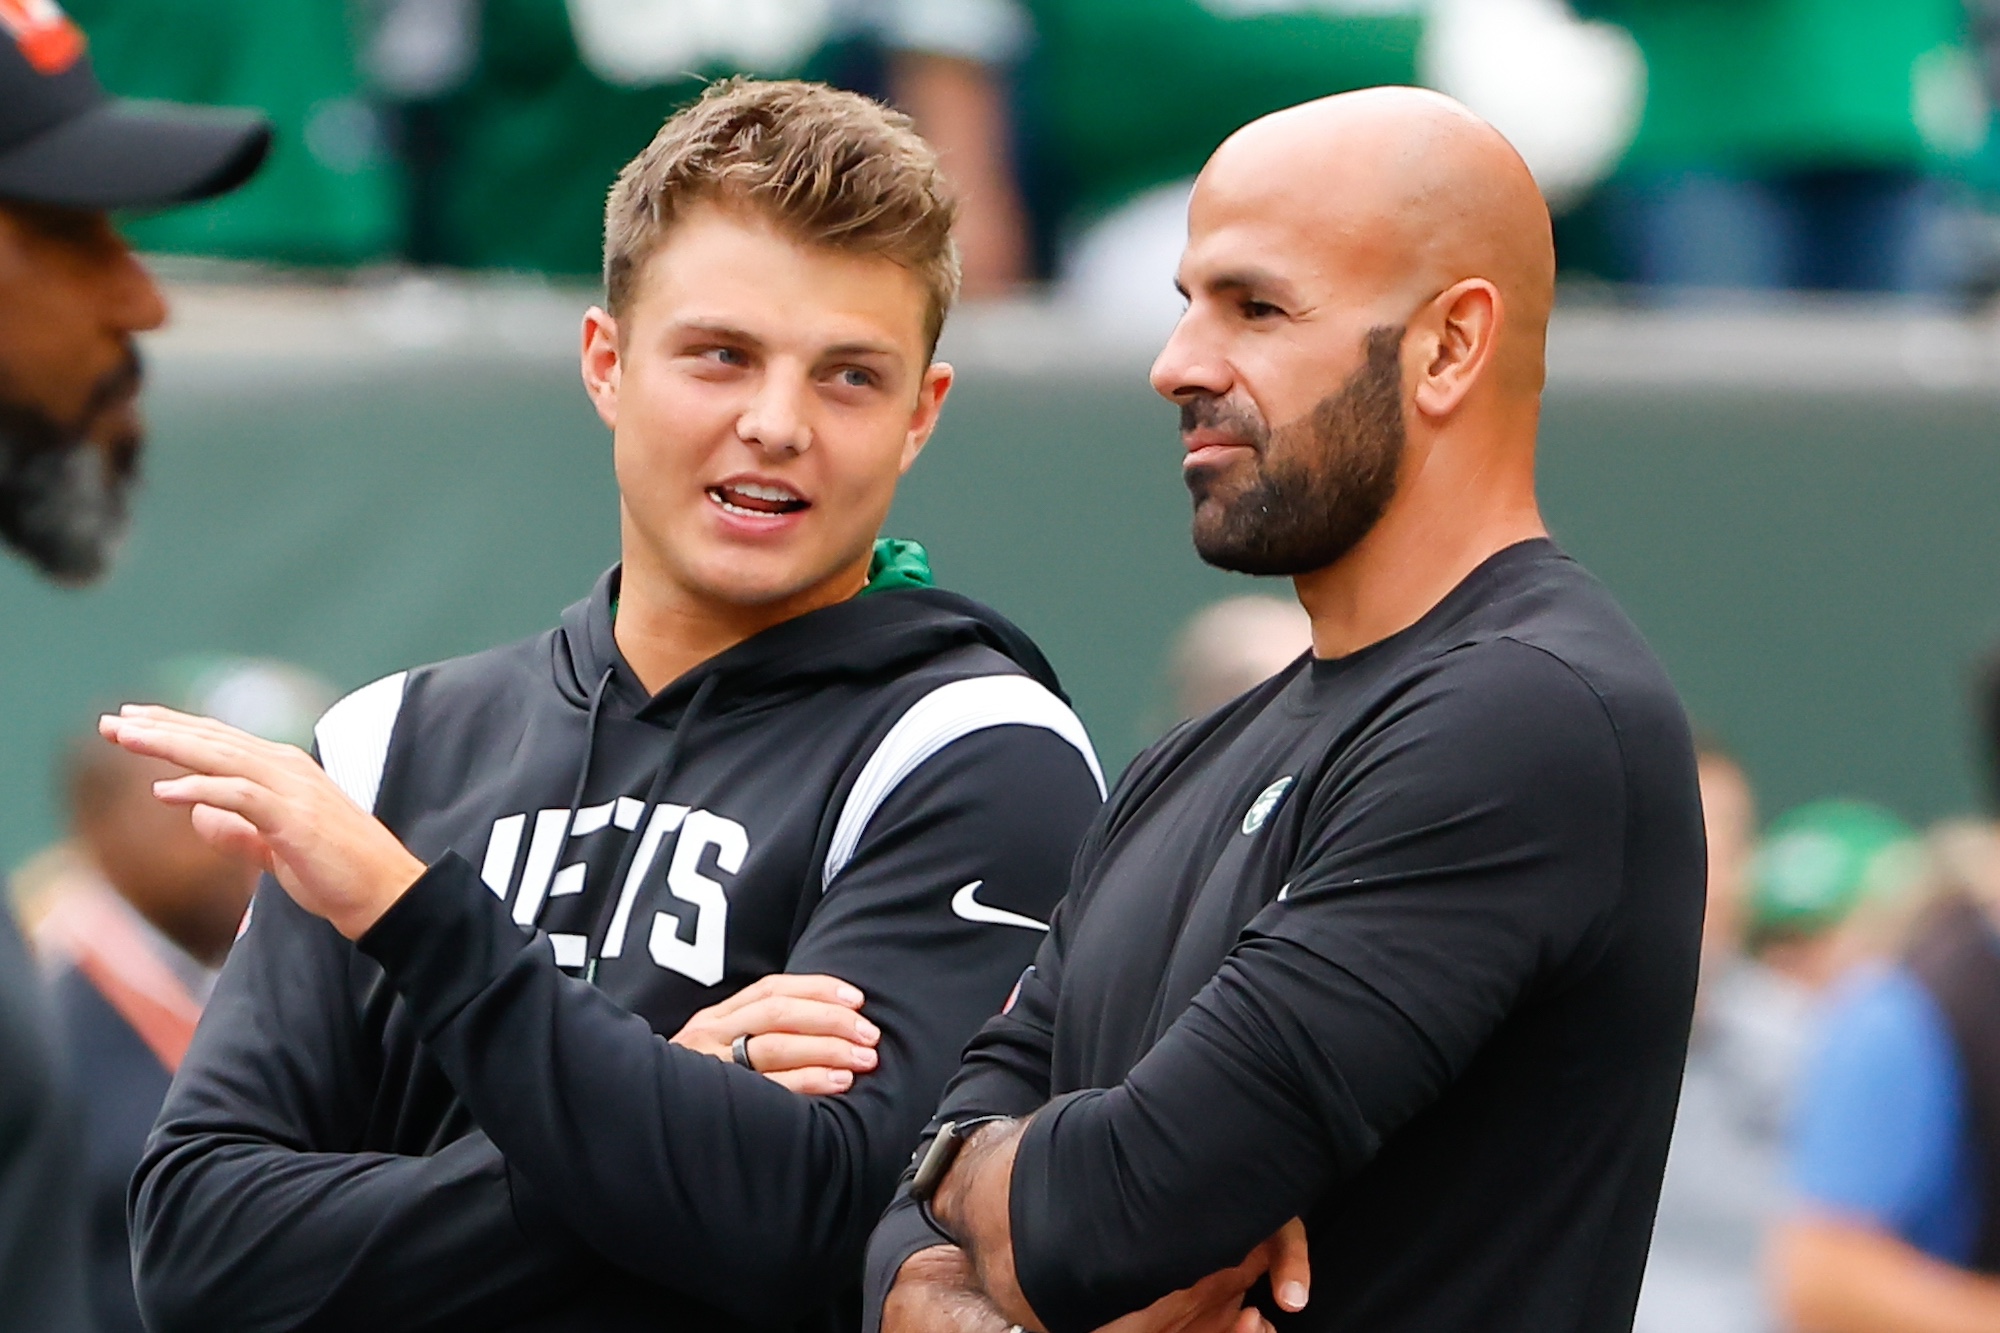 EAST RUTHERFORD, NJ - SEPTEMBER 25: New York Jets quarterback Zach Wilson (2) and New York Jets head coach Robert Saleh talk prior to the National Football League game between the New York Jets and the Cincinnati Bengals on September 25, 2022 at MetLife Stadium in East Rutherford, New Jersey. (Photo by Rich Graessle/Icon Sportswire via Getty Images)